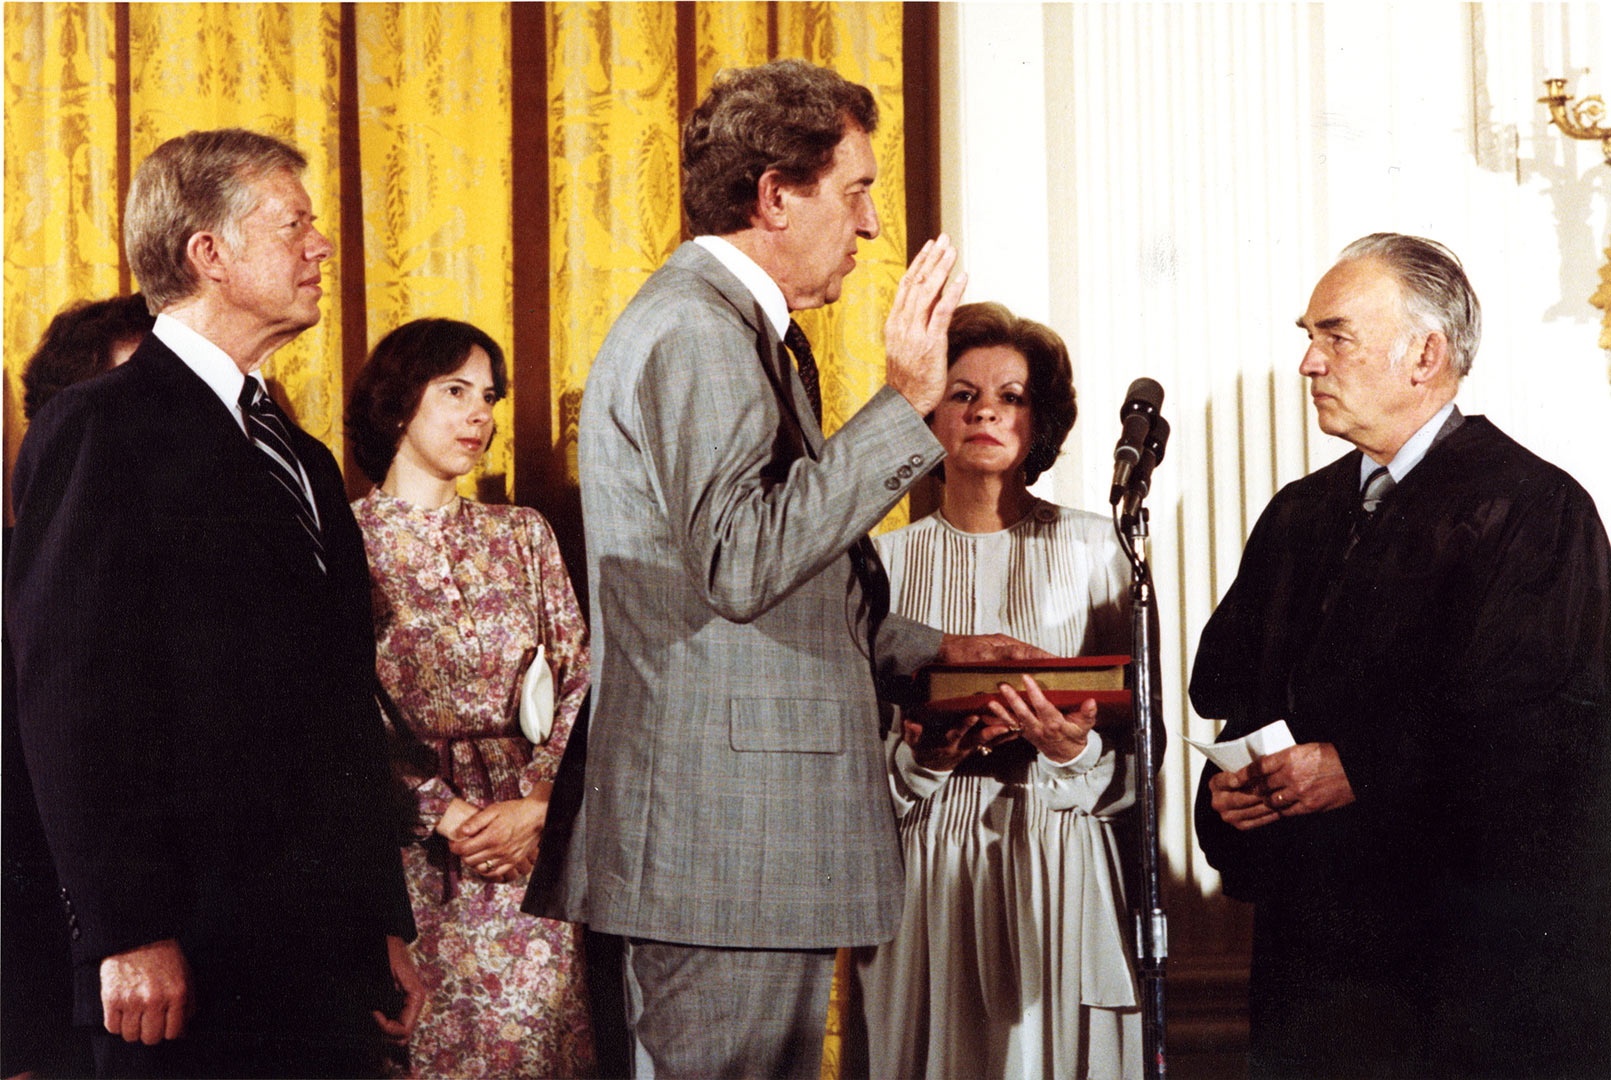 Edmund Muskie '36 is sworn in as U.S. secretary of state by longtime friend and adviser Frank Coffin '40, a federal judge at the time. Looking on are, from left, President Jimmy Carter; Muskie's daughter Ellen Muskie Allen; and his wife, Jane Muskie.